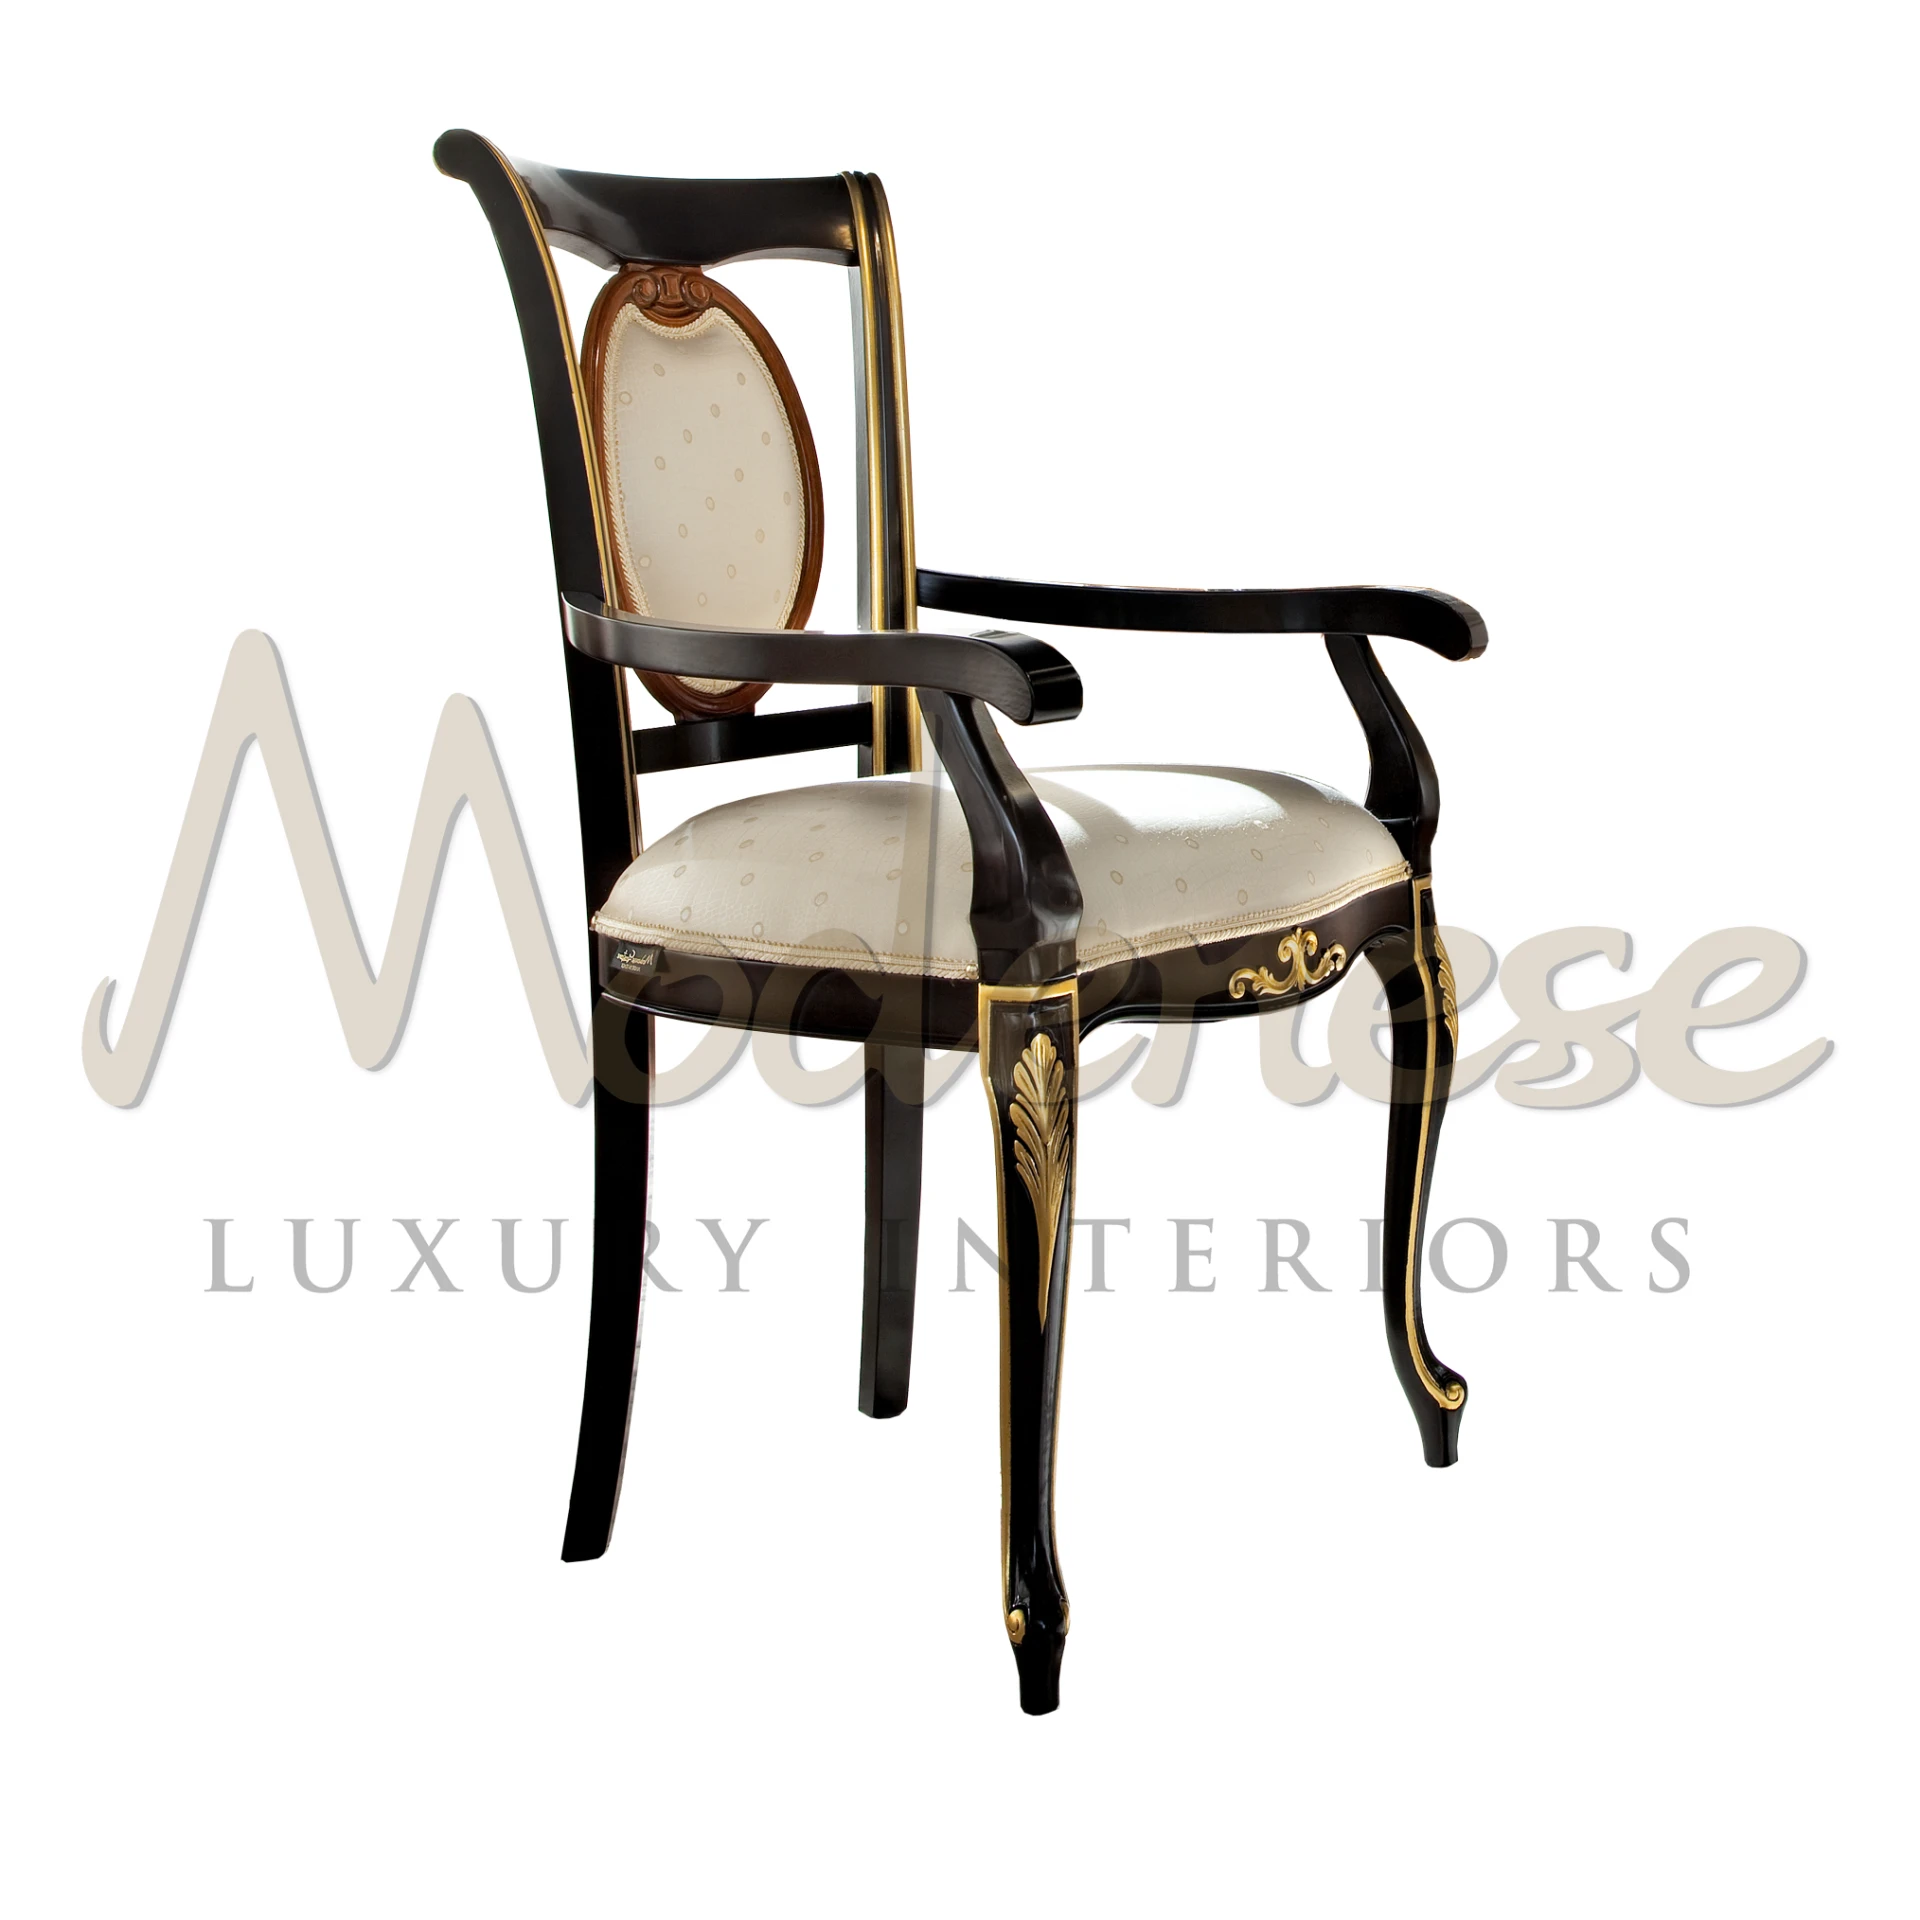 Handcrafted luxury seating atop a black lacquered wooden frame, adorned with golden details. Elevate your décor with timeless beauty.